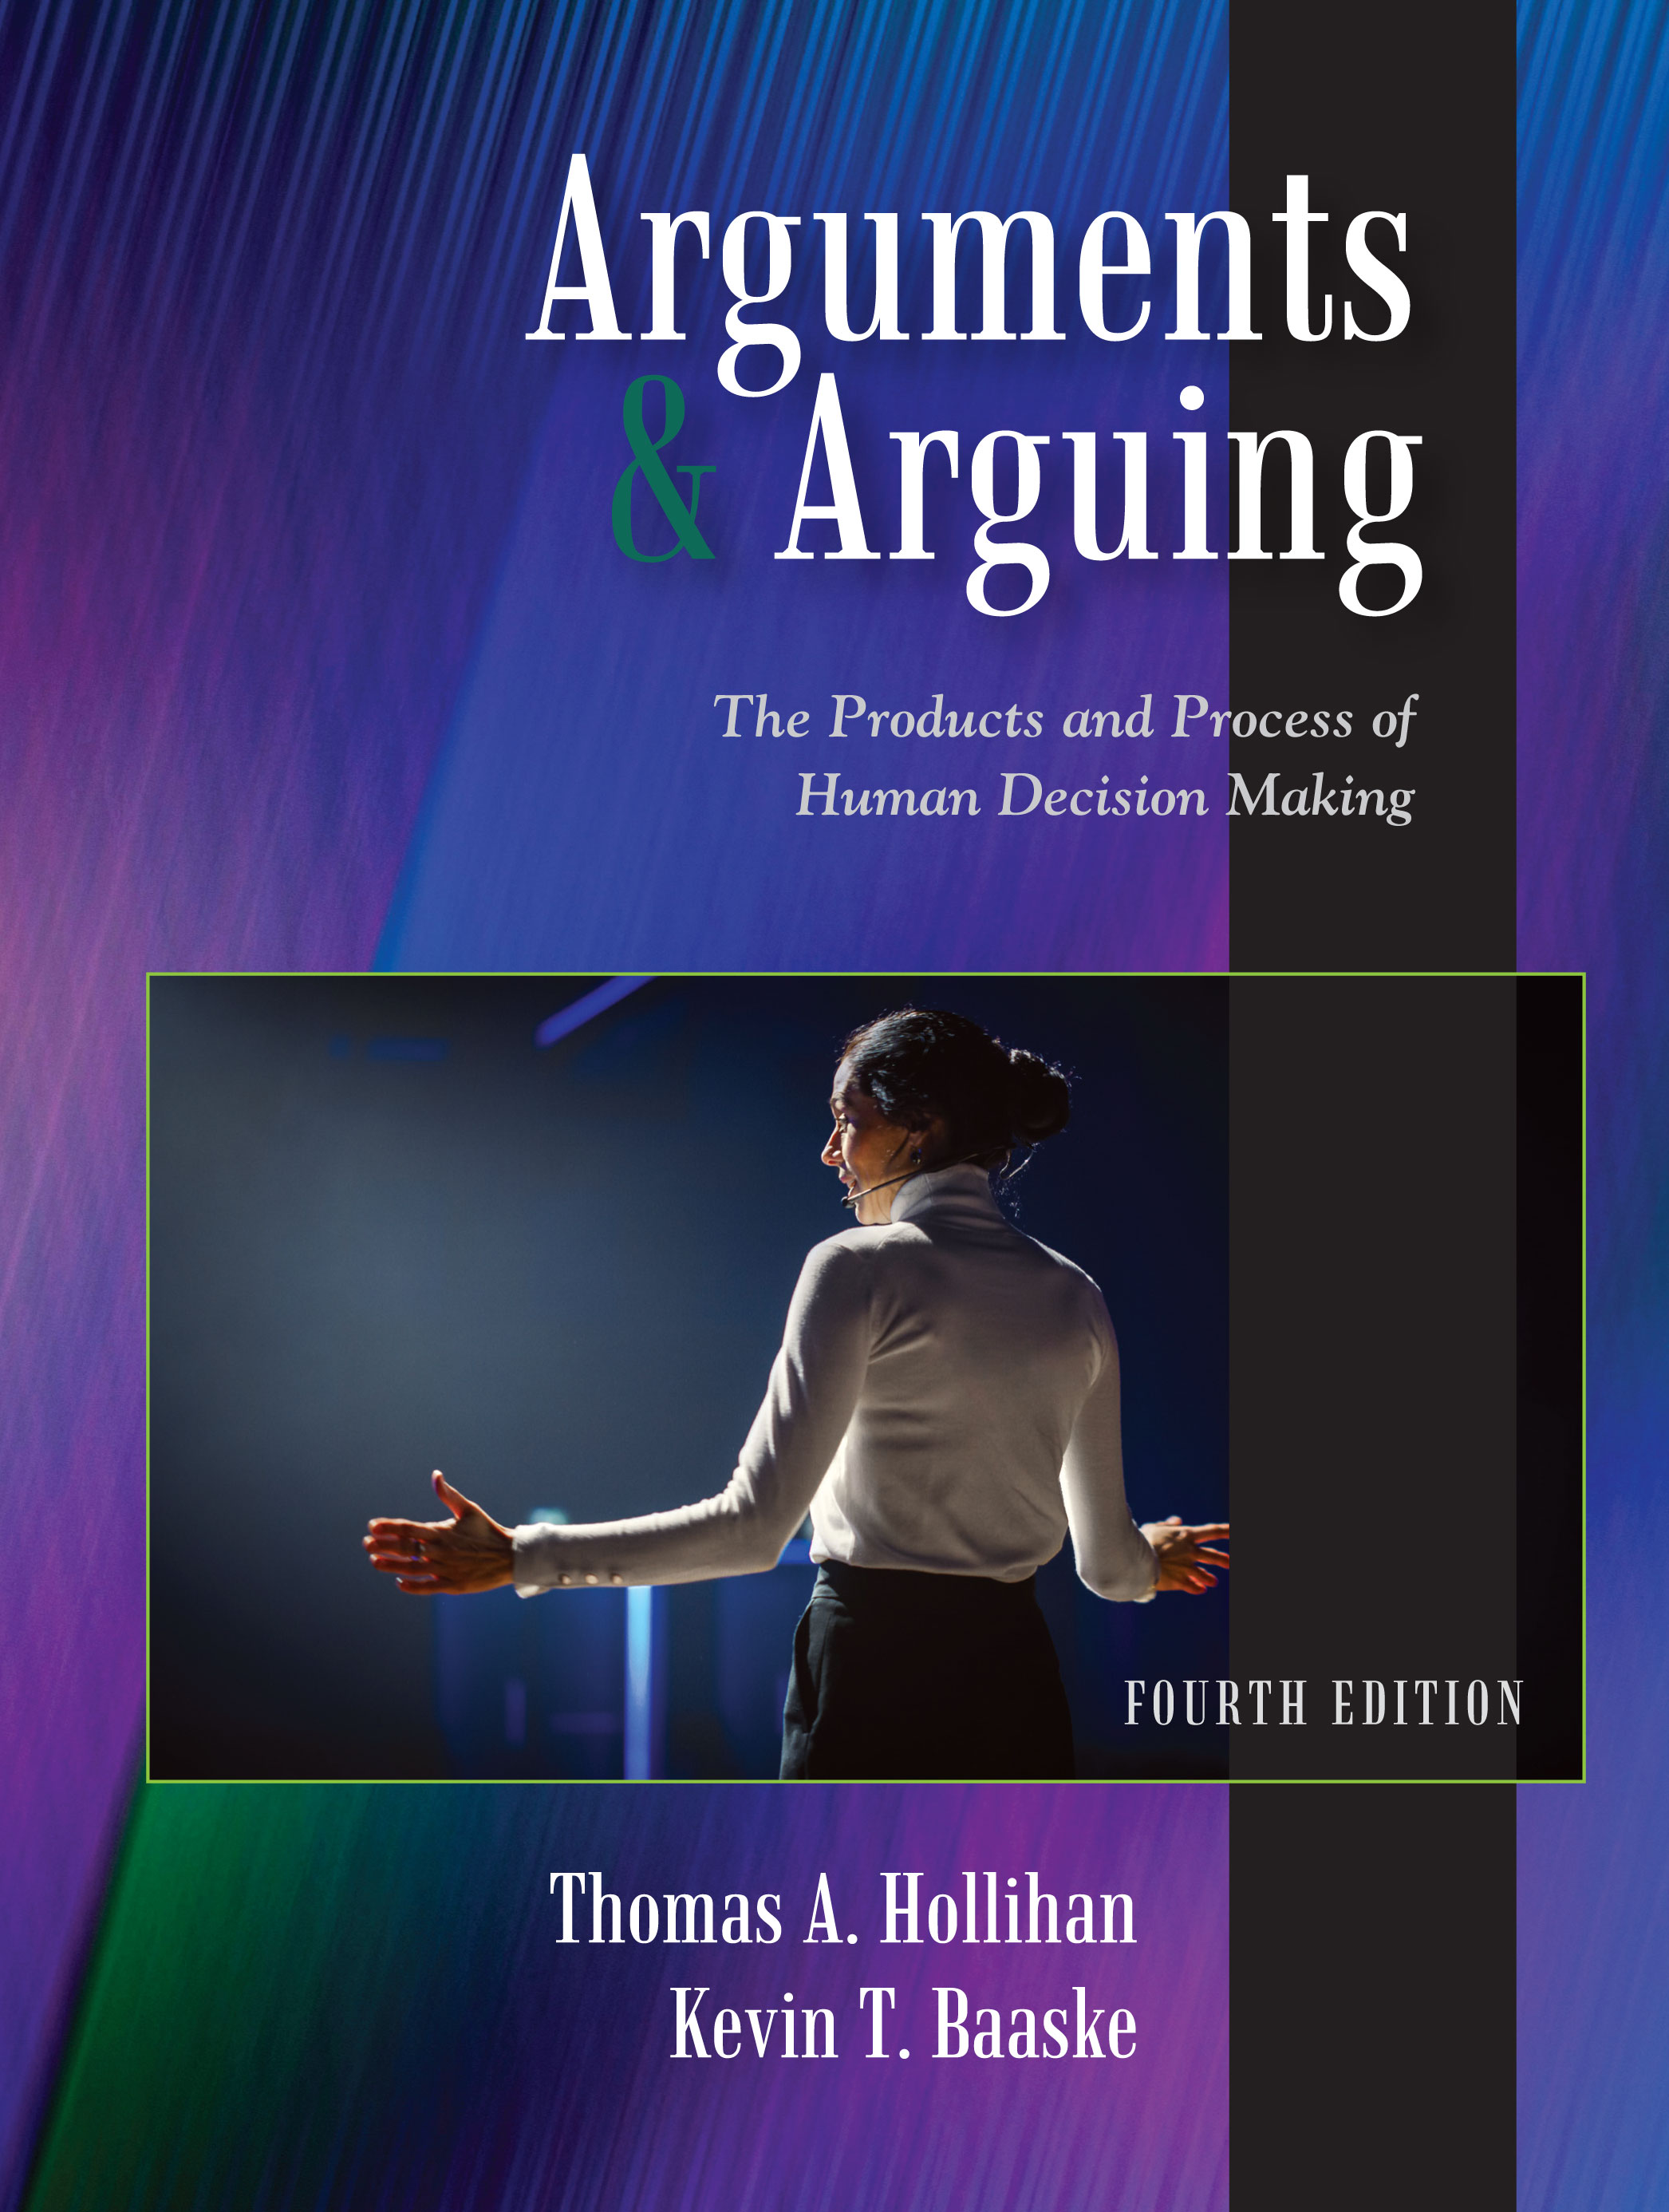 Arguments and Arguing: The Products and Process of Human Decision Making, Fourth Edition by Thomas A. Hollihan, Kevin T. Baaske